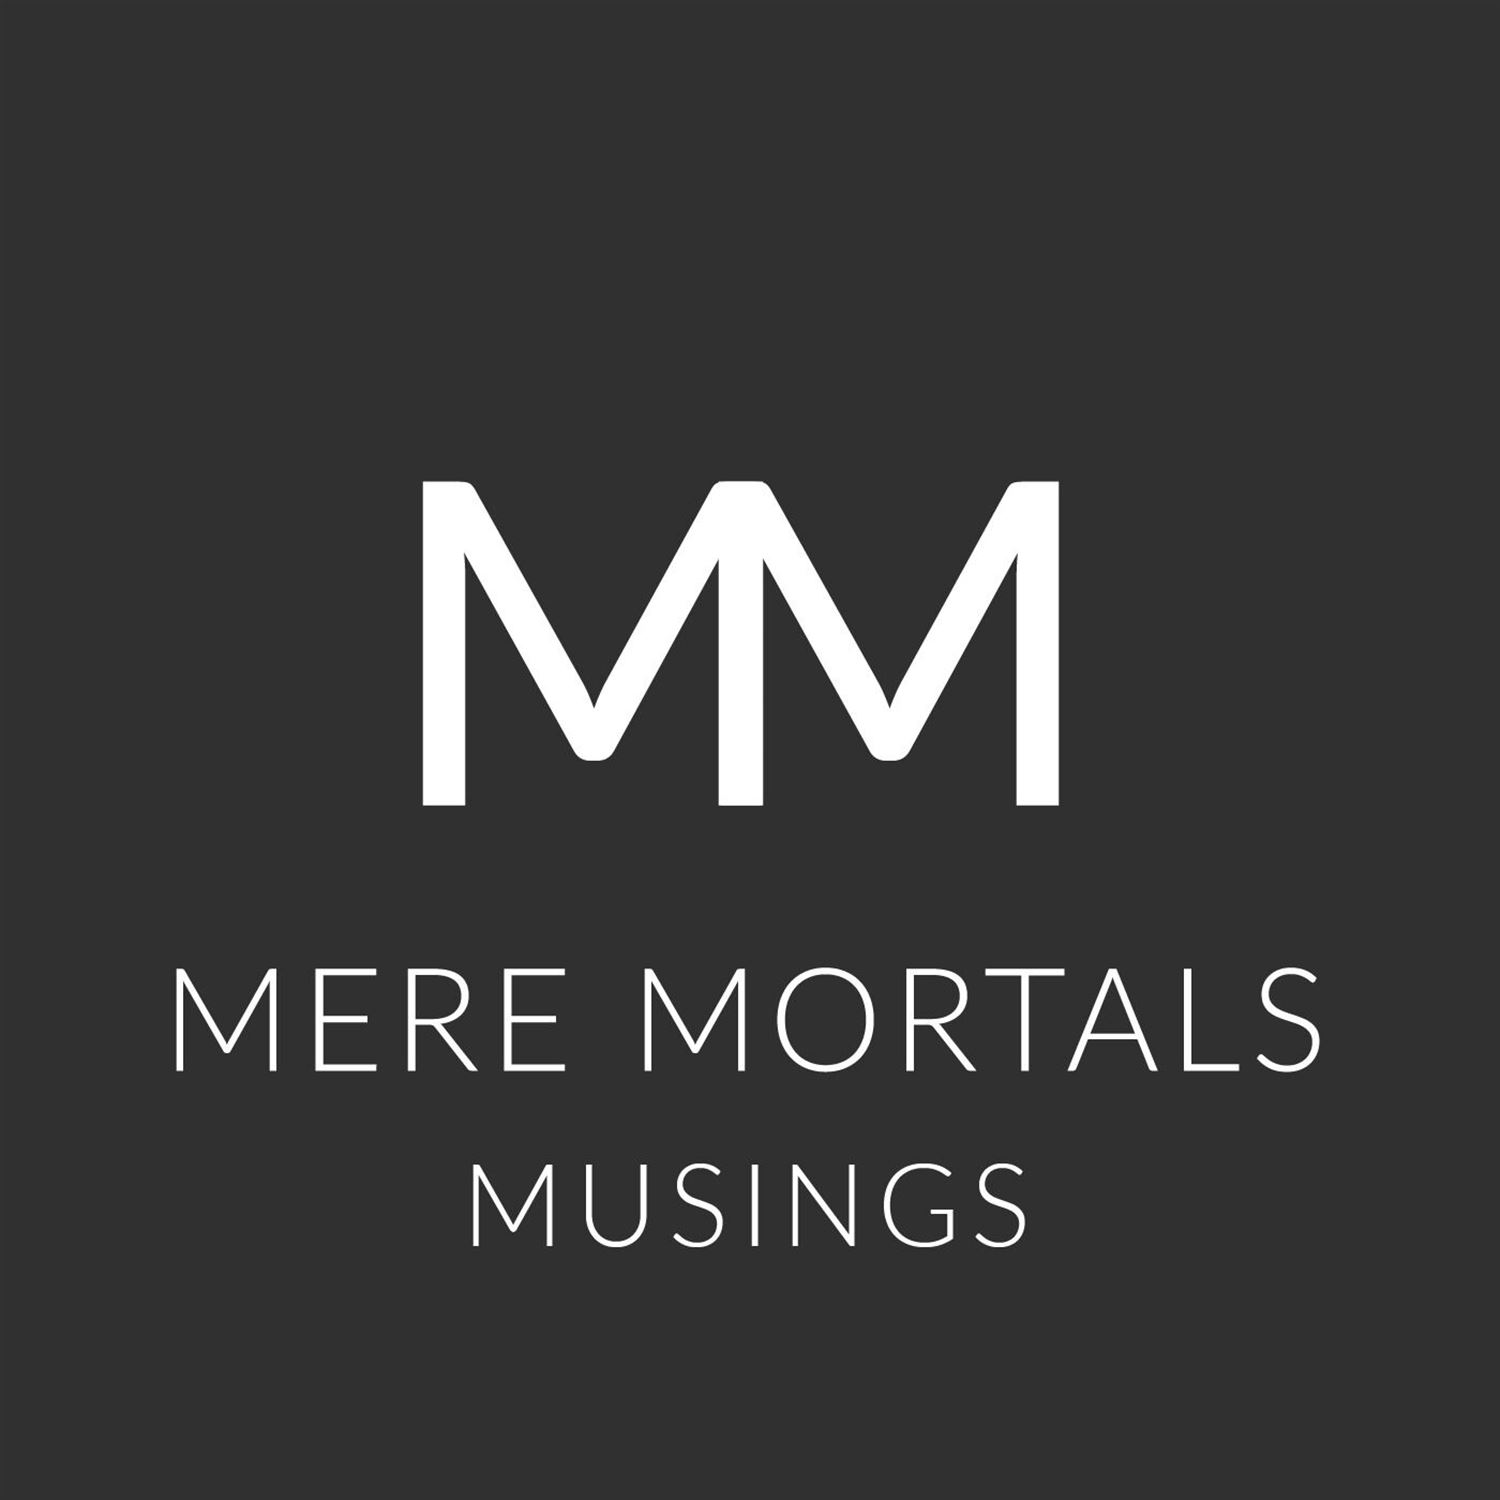 What Your New Car Can Teach You (Mere Mortals Episode #55 - Musings)